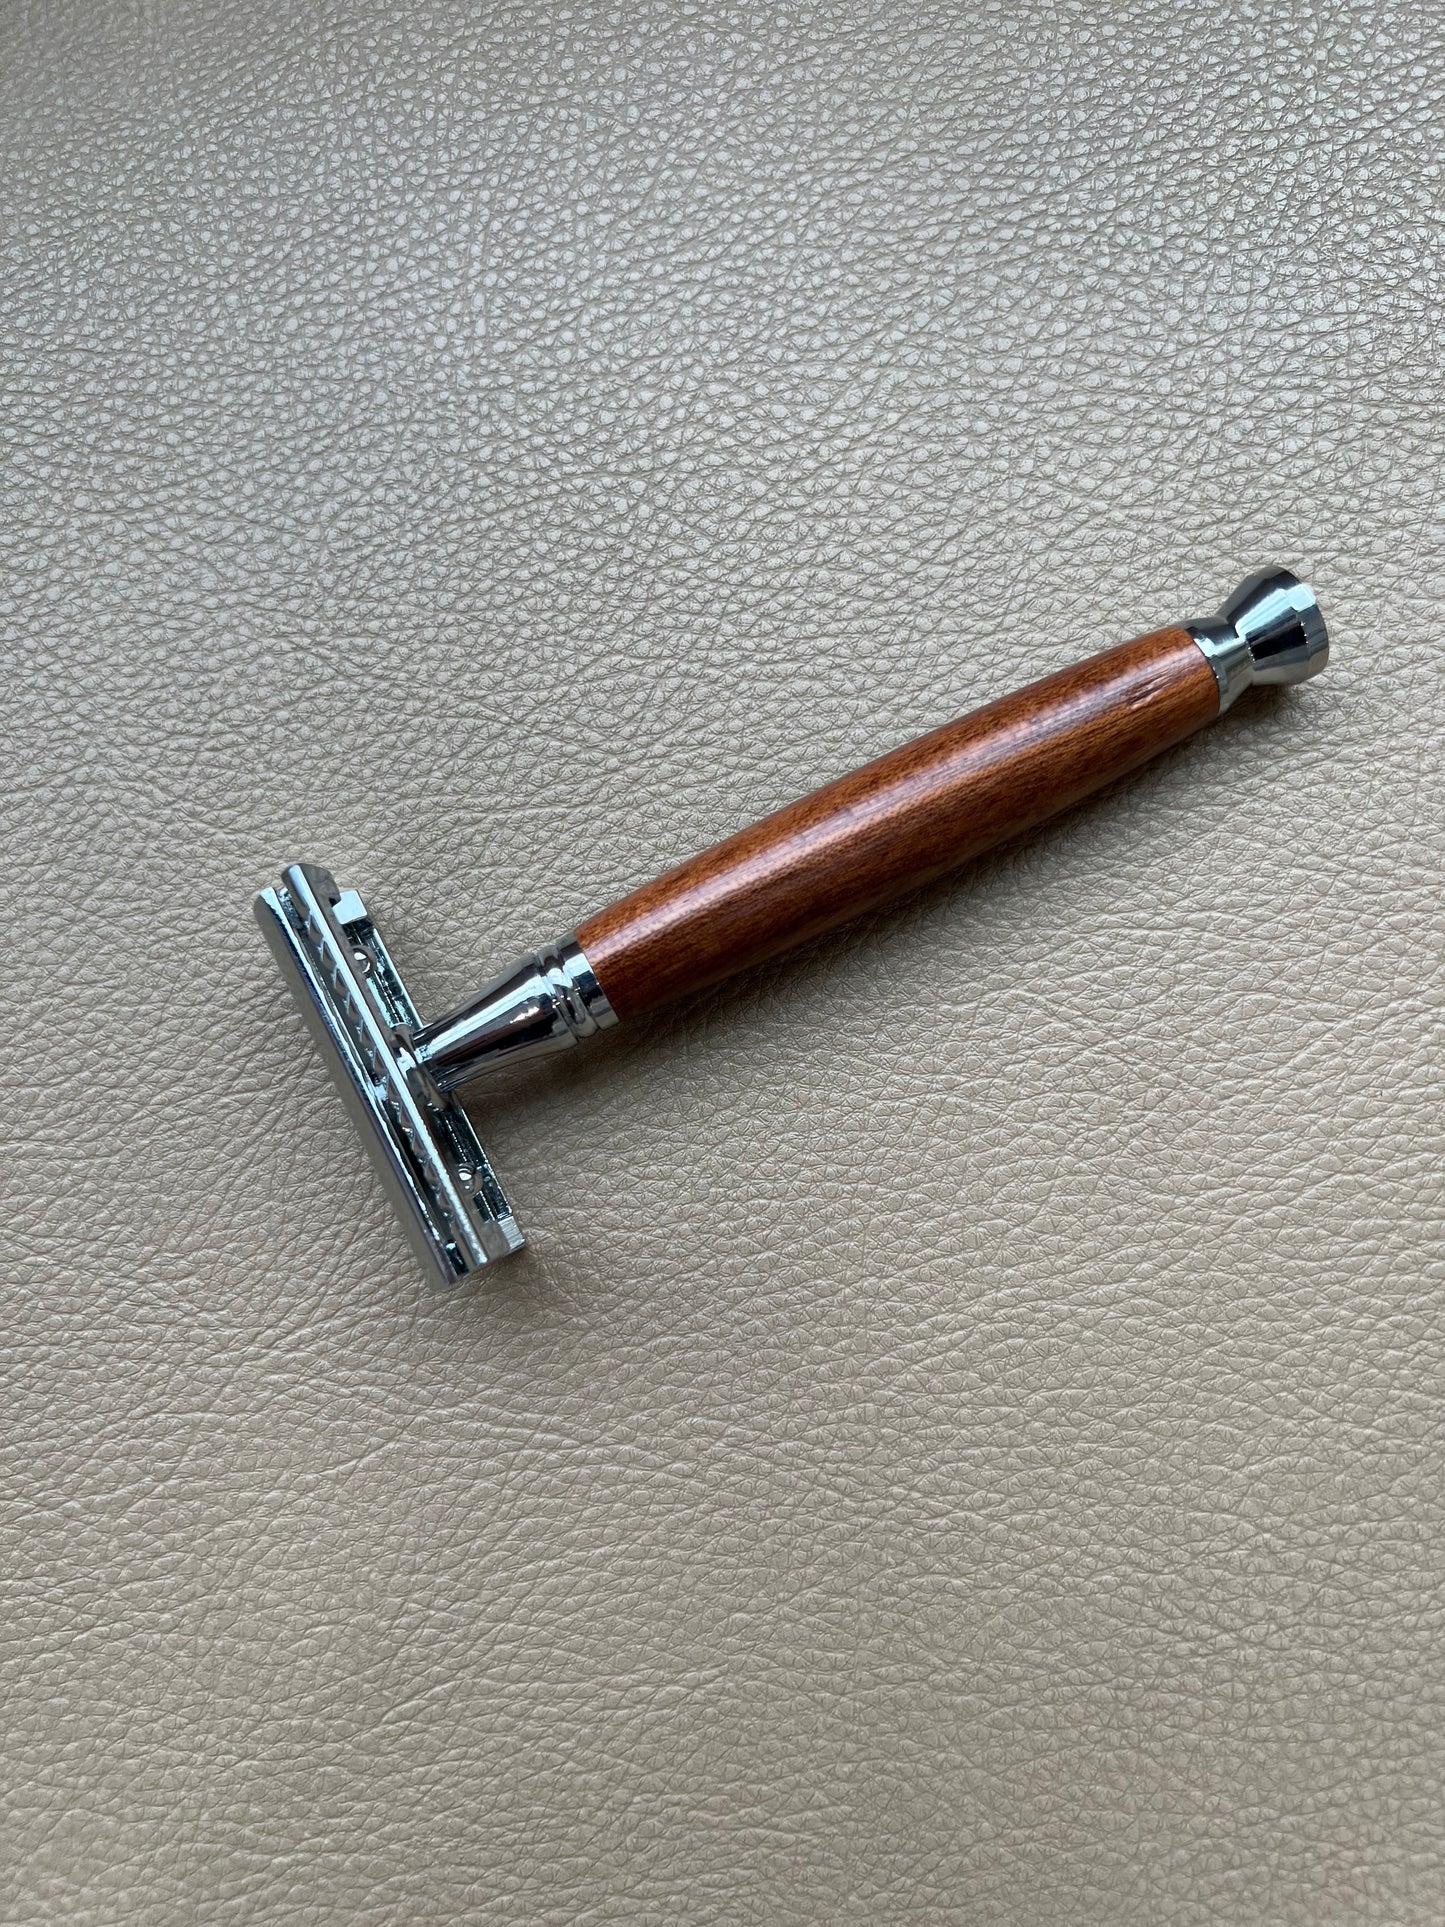 Safety Razor with wooden handle